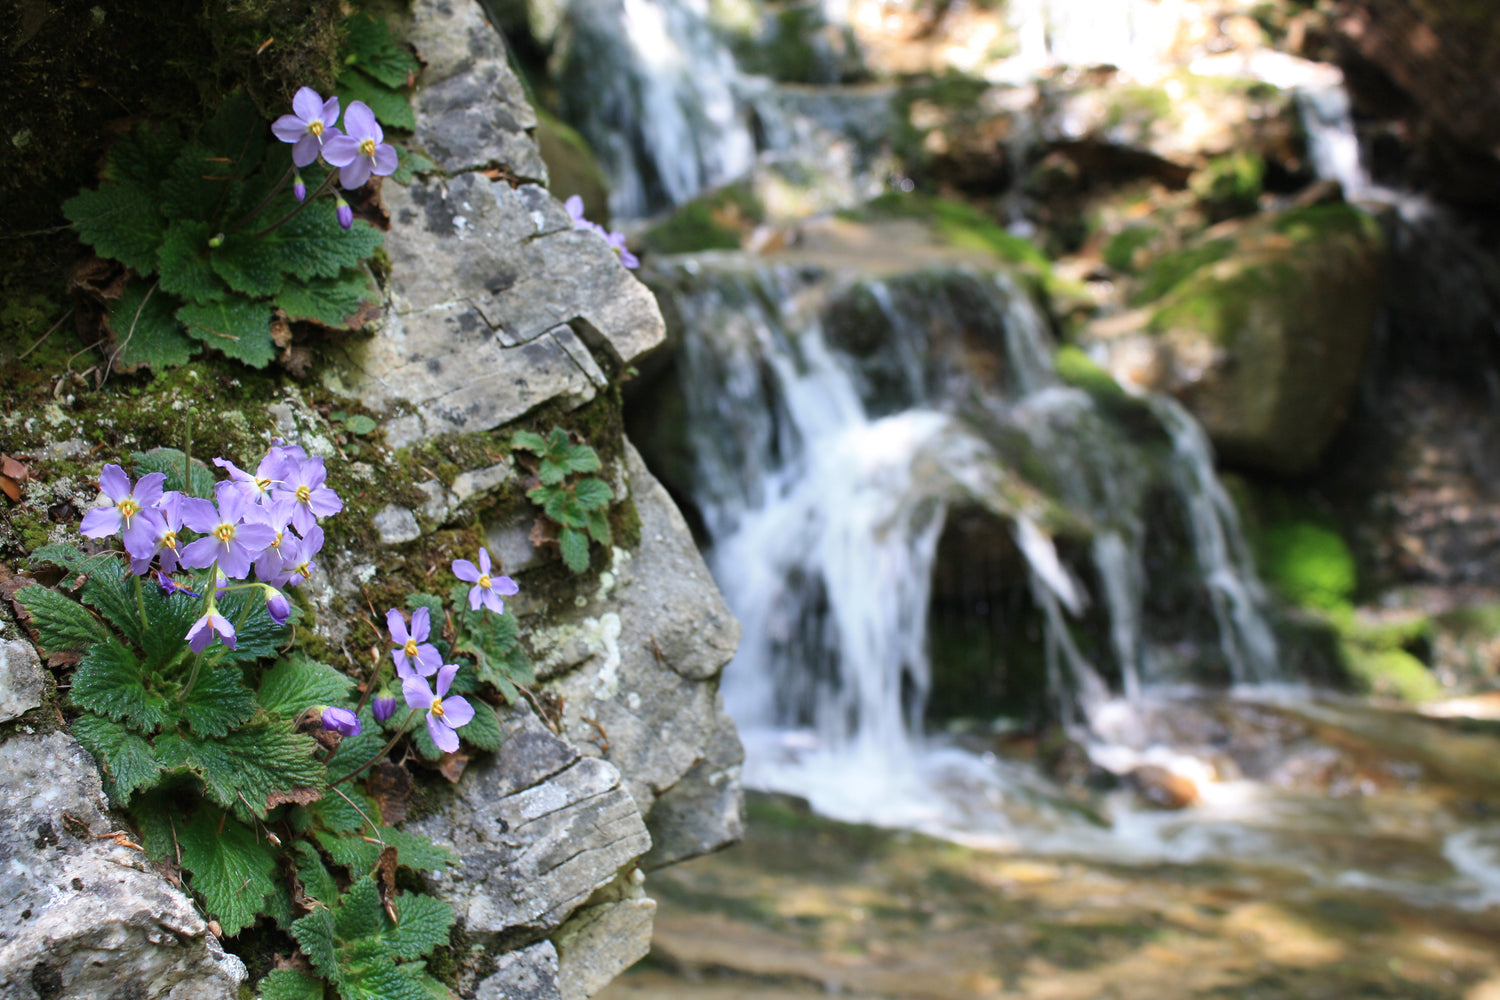 Wild light-colored violets growing on a rocky cliff wall with a waterfall visible in the background. The area is shaded and humid, with moss growing on the rocks.